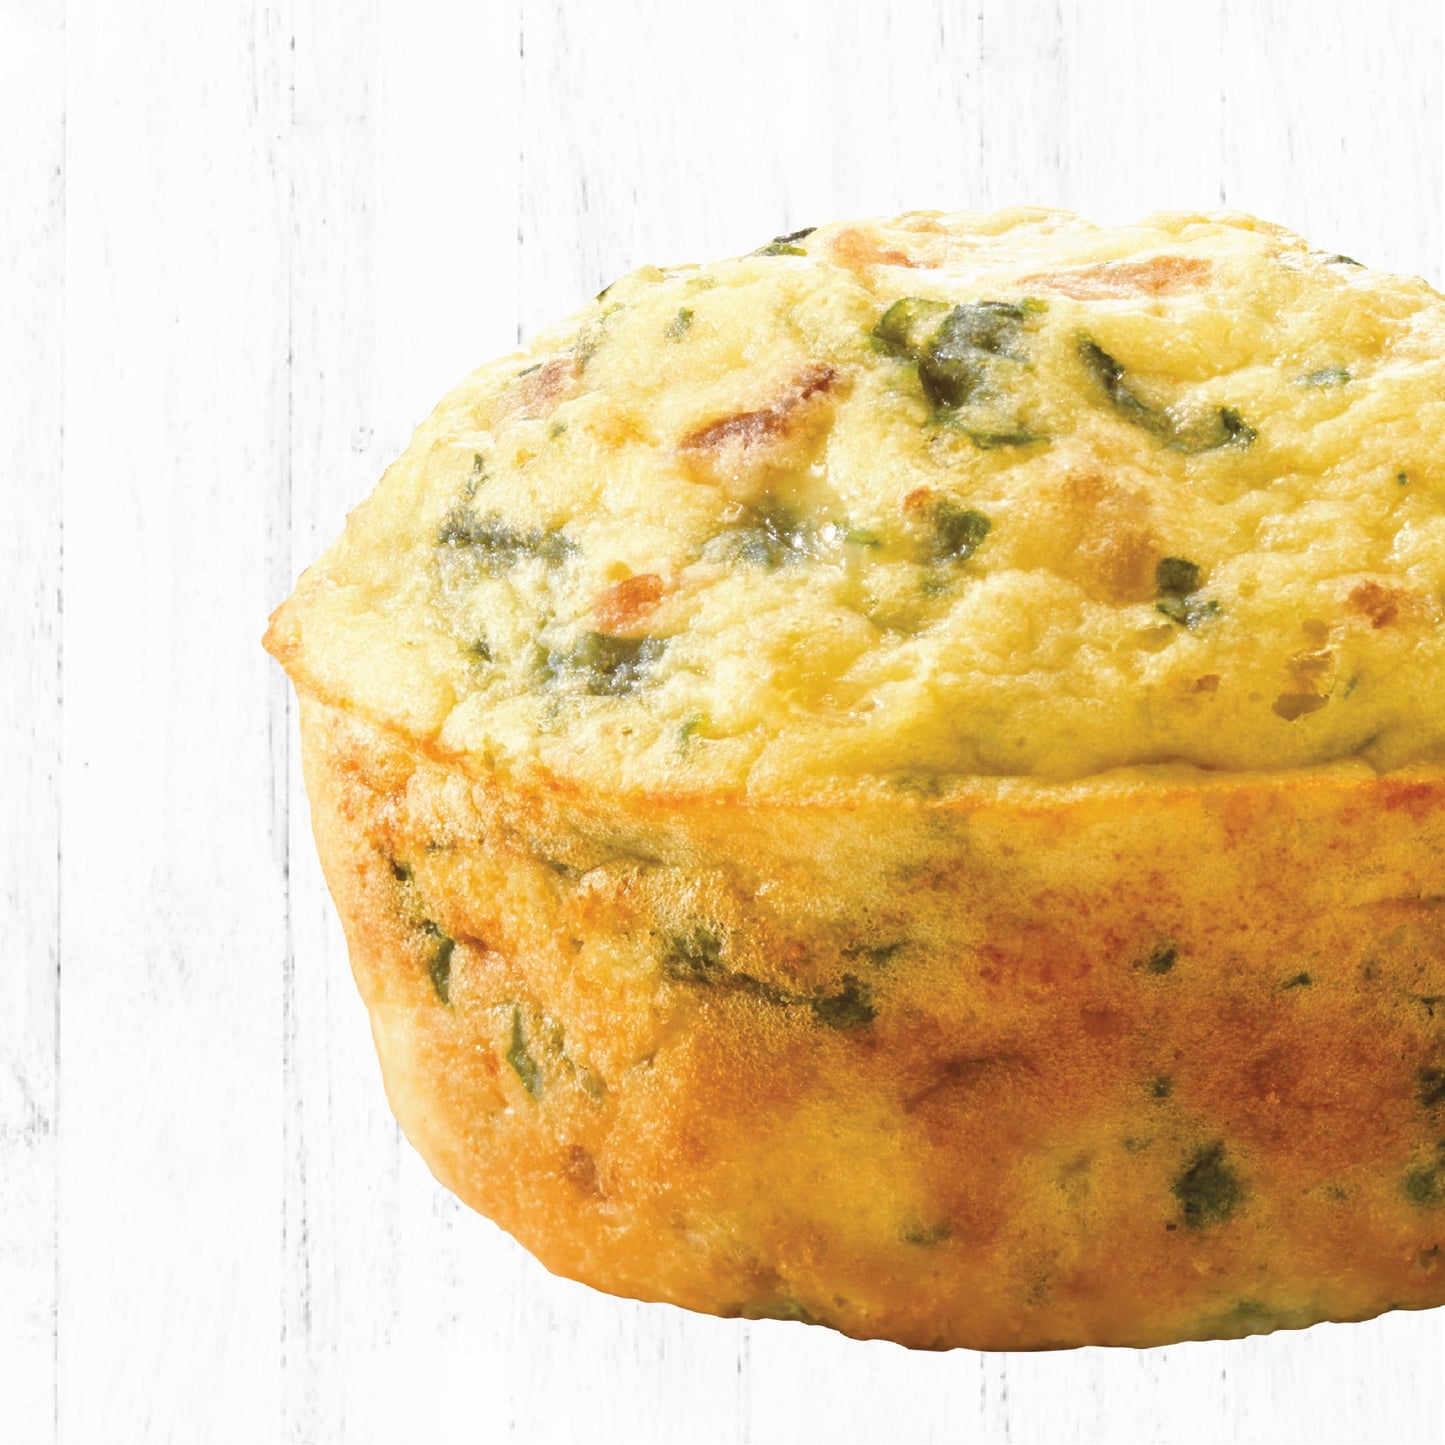 Jimmy Dean Delights Bacon & Spinach Frittatas, 12 oz, 6 Ct (Frozen)